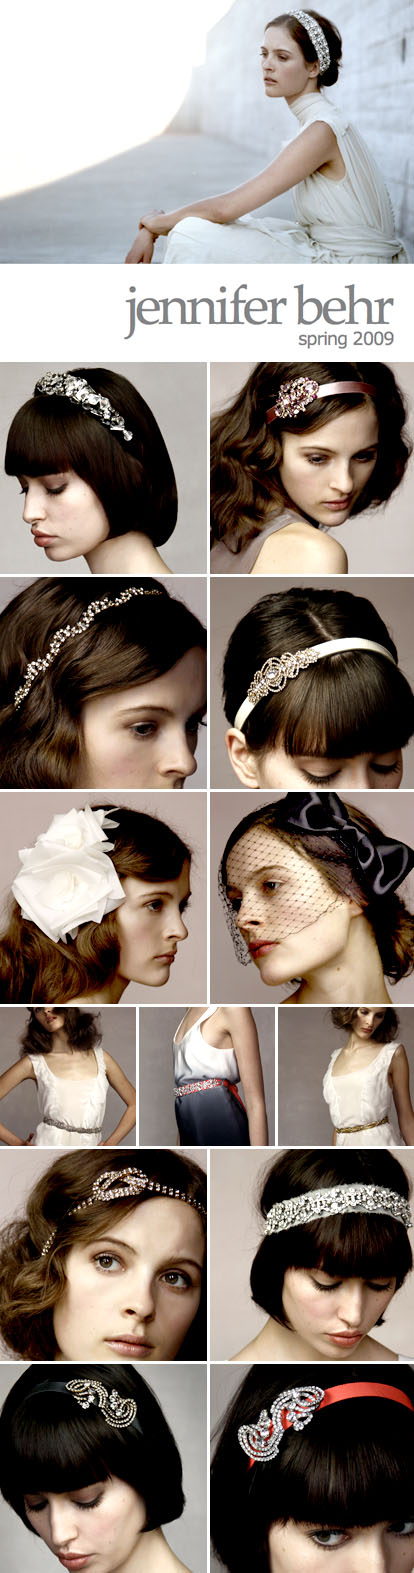 Jennifer Behr bridal hair accessories, spring 09 collection, veils, headbands, jewels, feathers and ribbons